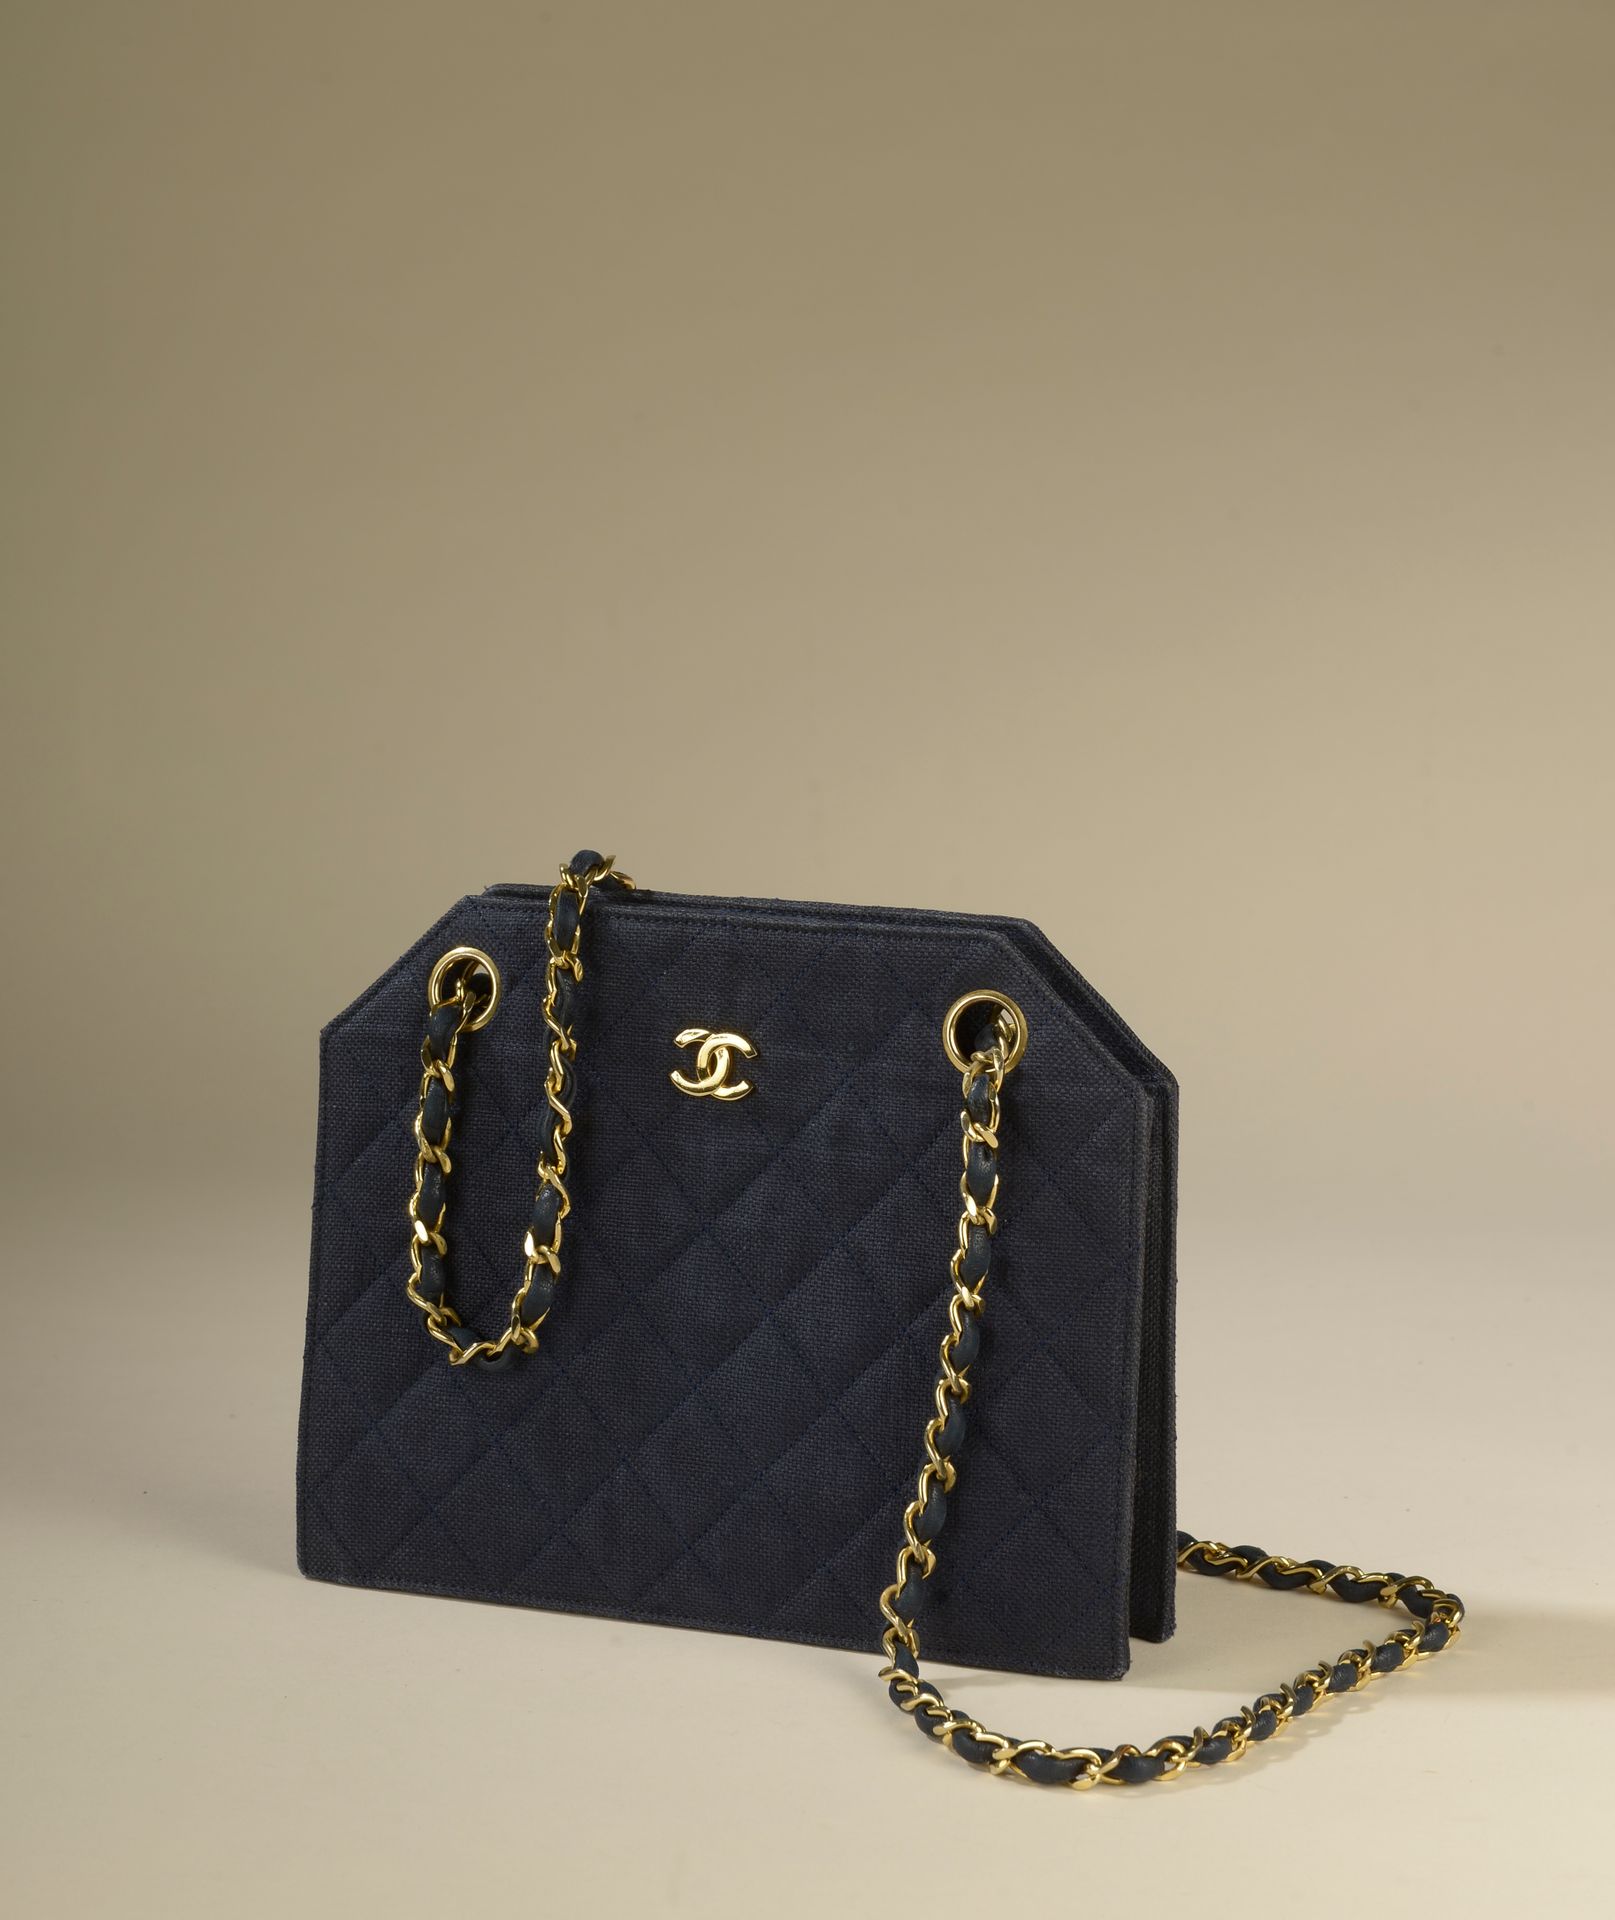 CHANEL. Navy blue quilted canvas bag, a gold metal chai…